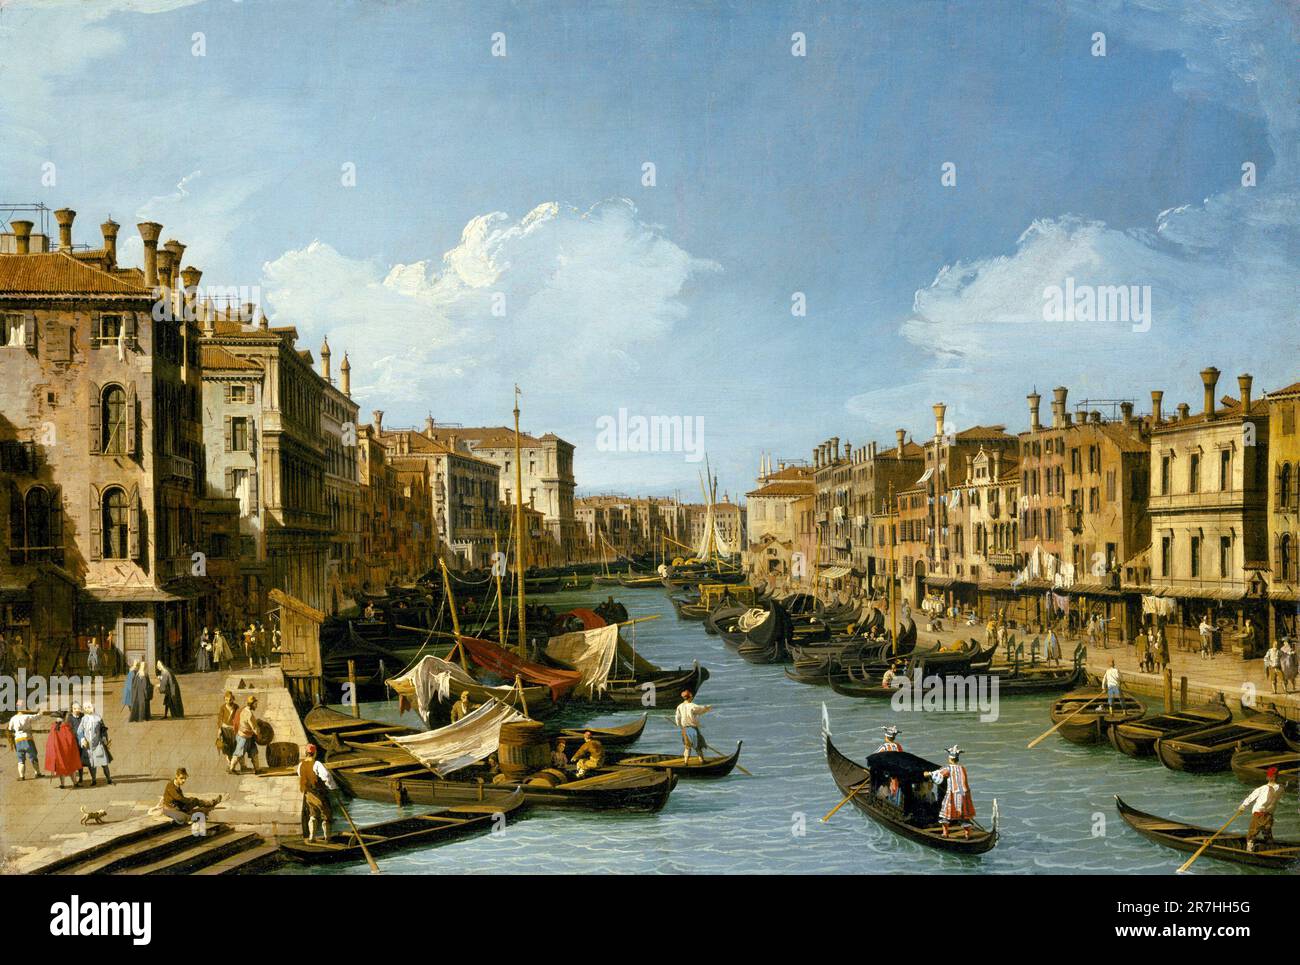 The Grand Canal near the Rialto Bridge, Venice  painted by the Venetian painter Giovanni Antonio Canal, commonly known as Canaletto. Stock Photo